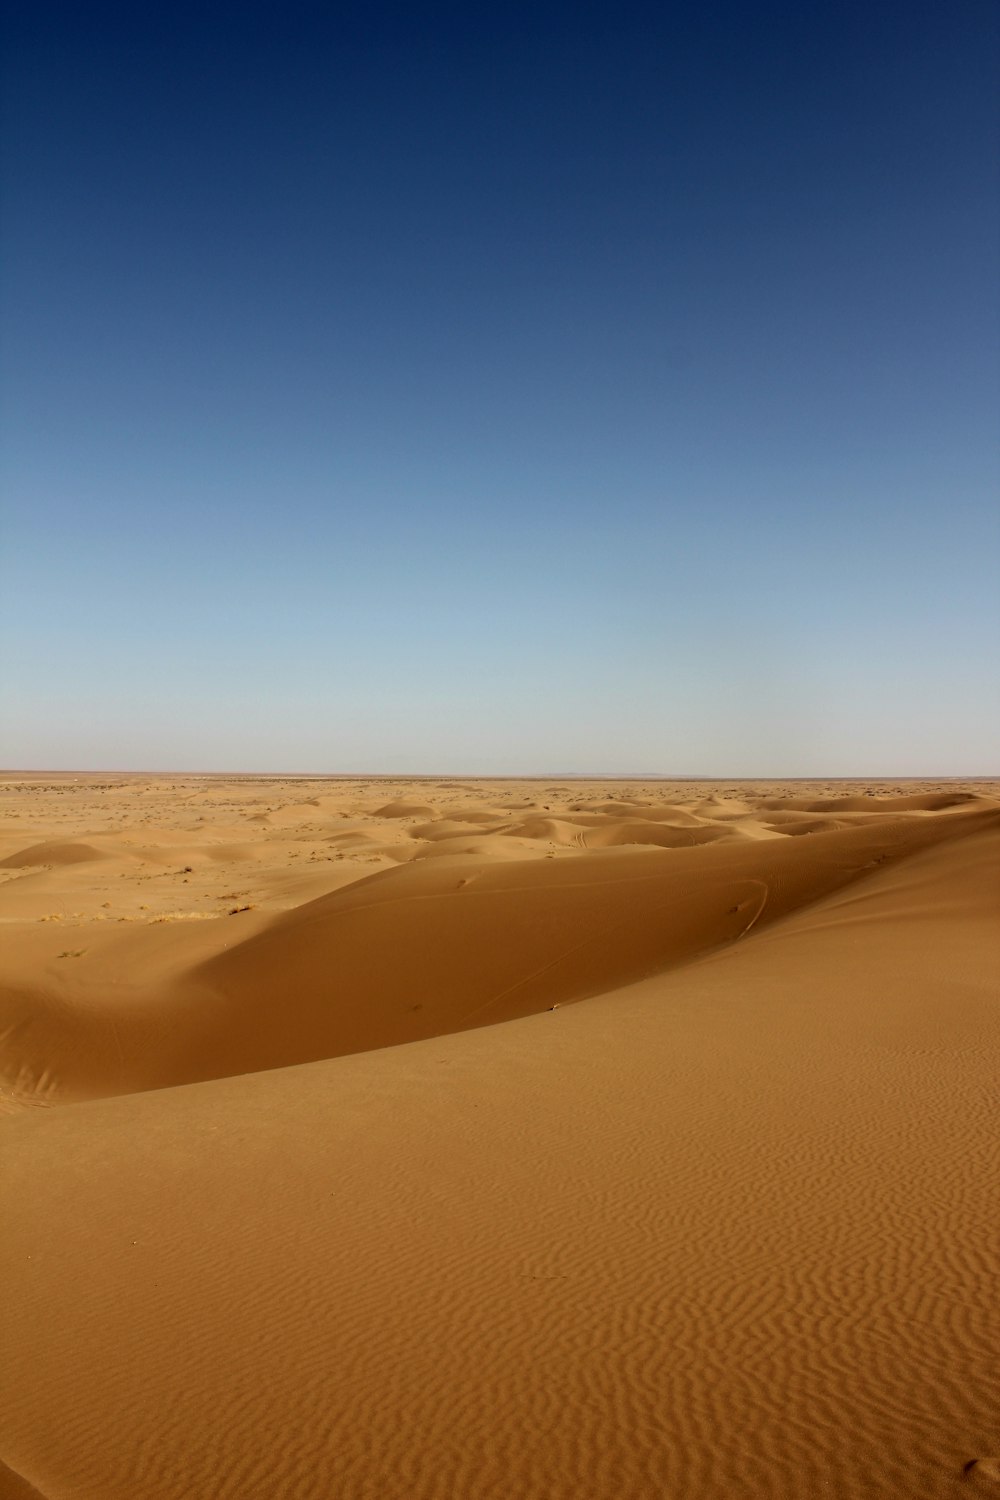 a desert with a blue sky and some sand dunes